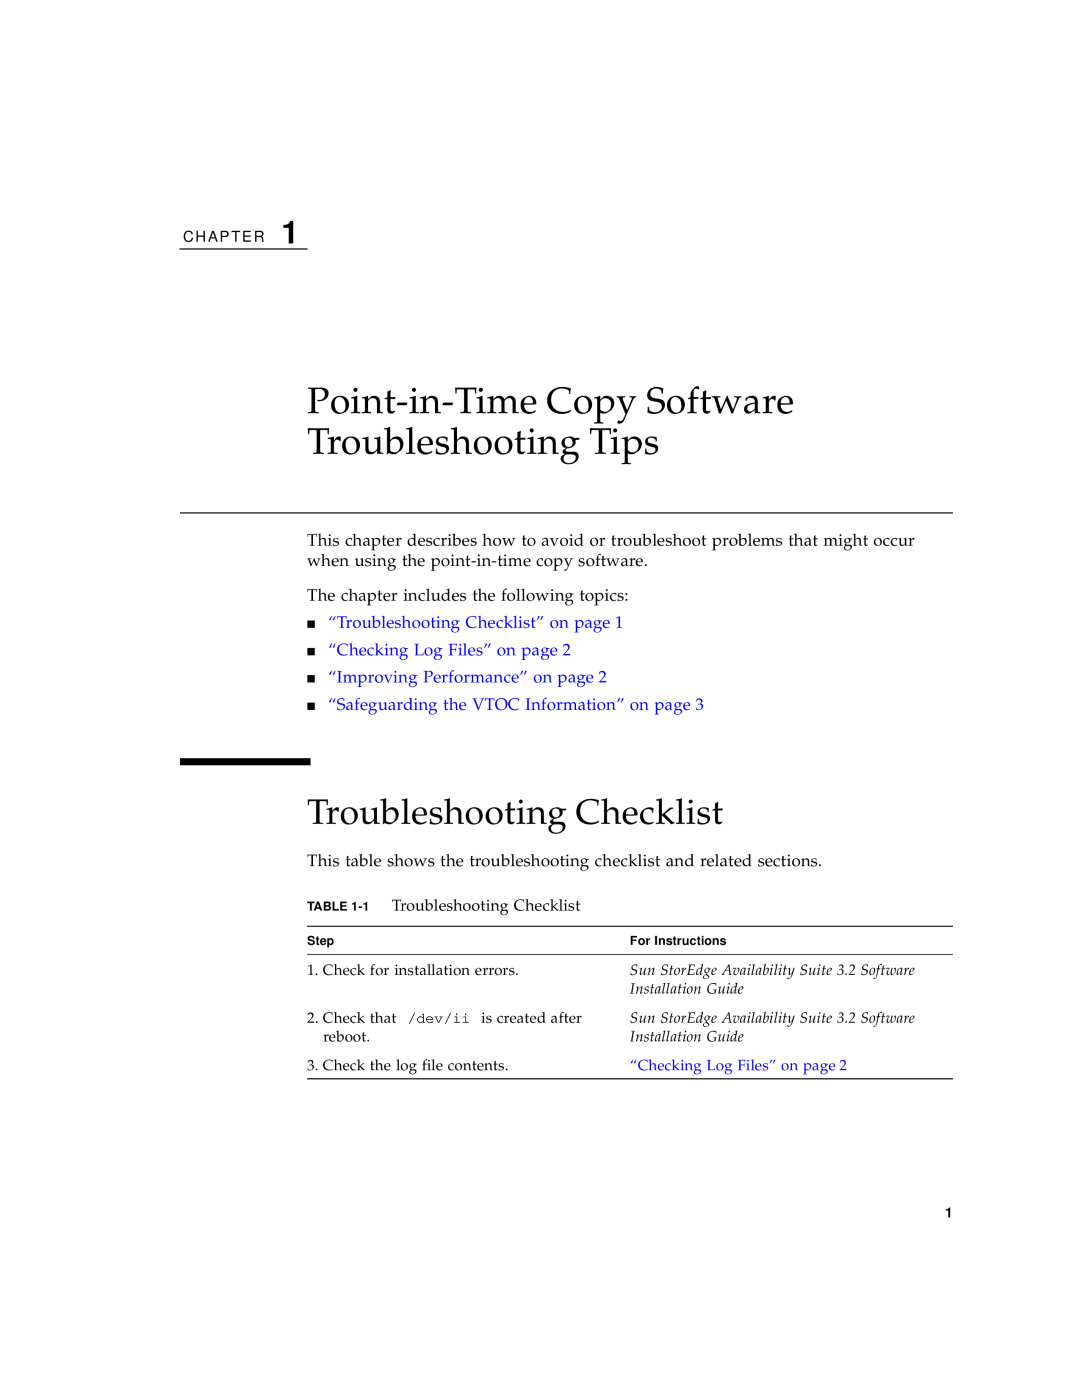 Sun Microsystems 3.2 manual Point-in-TimeCopy Software Troubleshooting Tips, Troubleshooting Checklist 